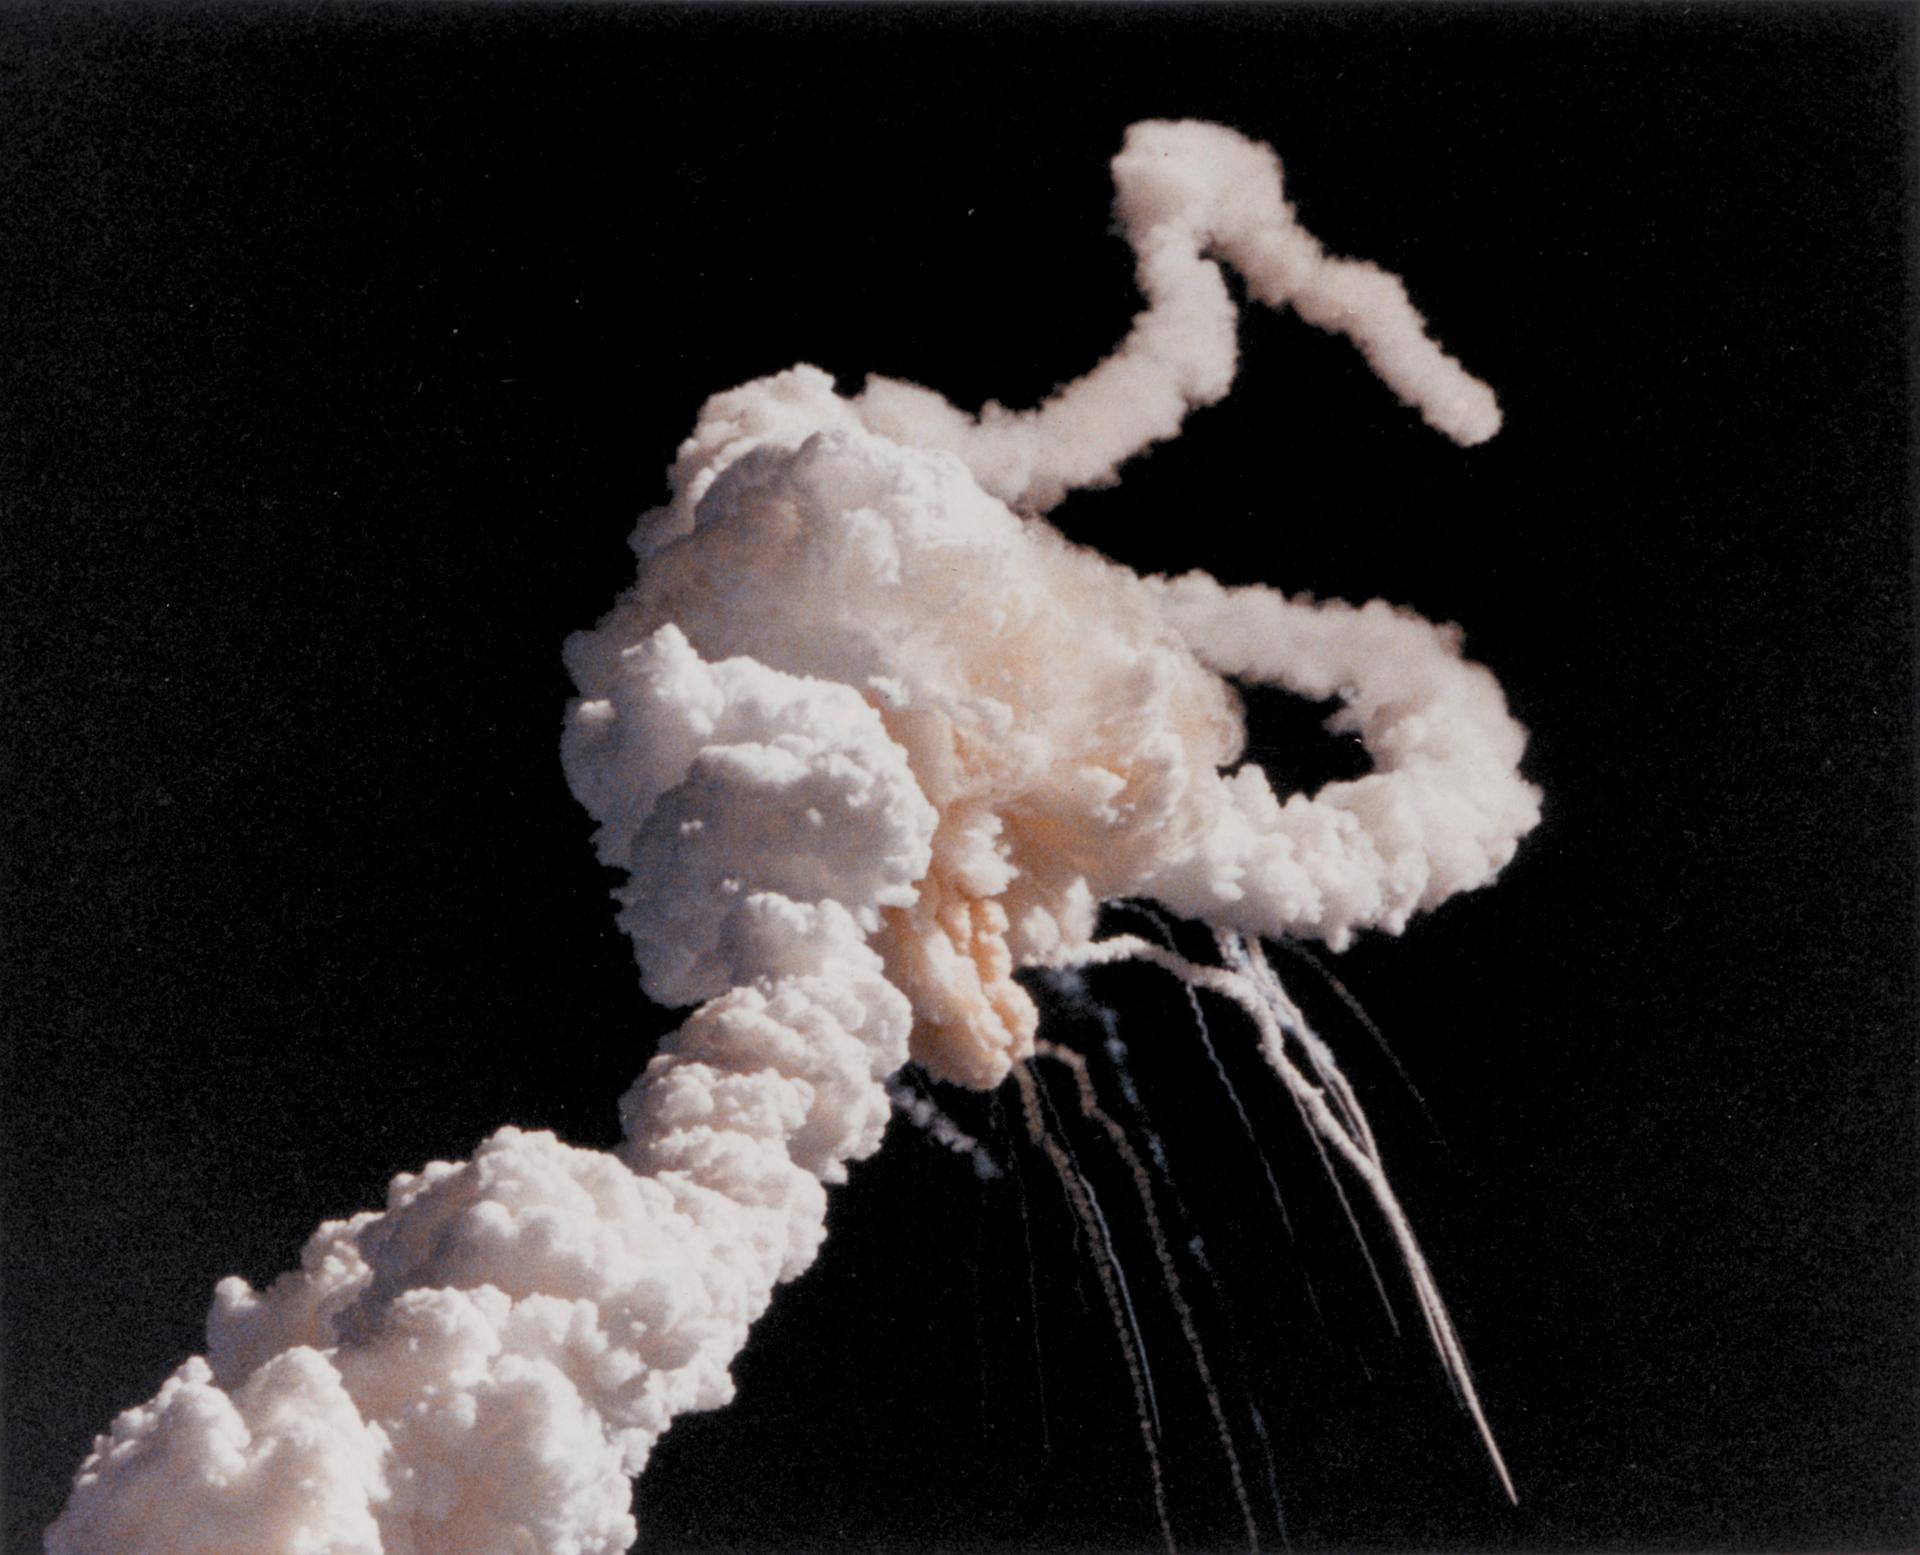 The Space Shuttle Challenger and her seven-member crew were lost when a ruptured O-ring in the right Solid Rocket Booster caused an explosion soon after launch from the Kennedy Space Center in this NASA handout photo dated January 28, 1986.